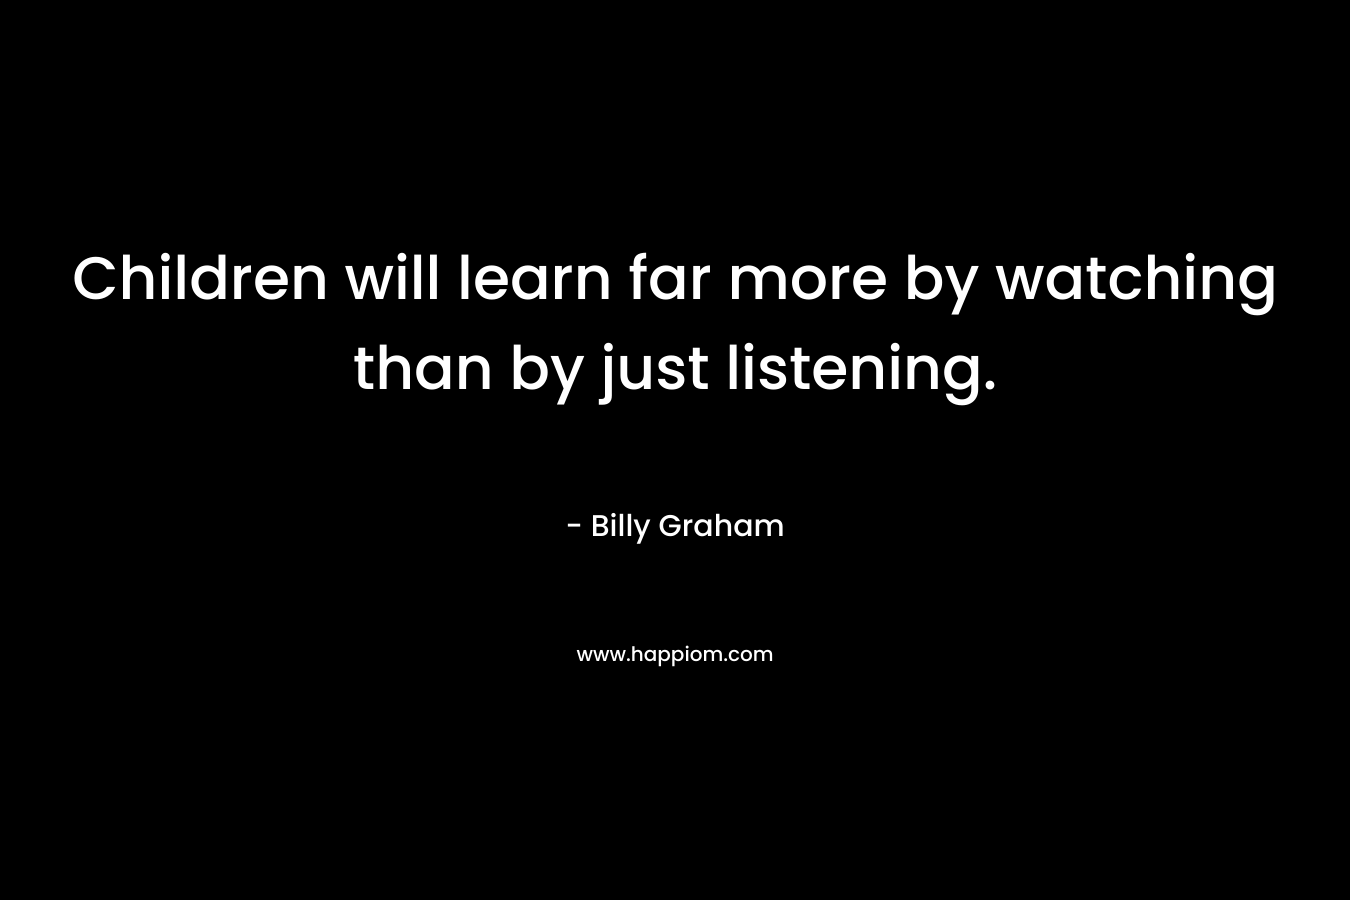 Children will learn far more by watching than by just listening.